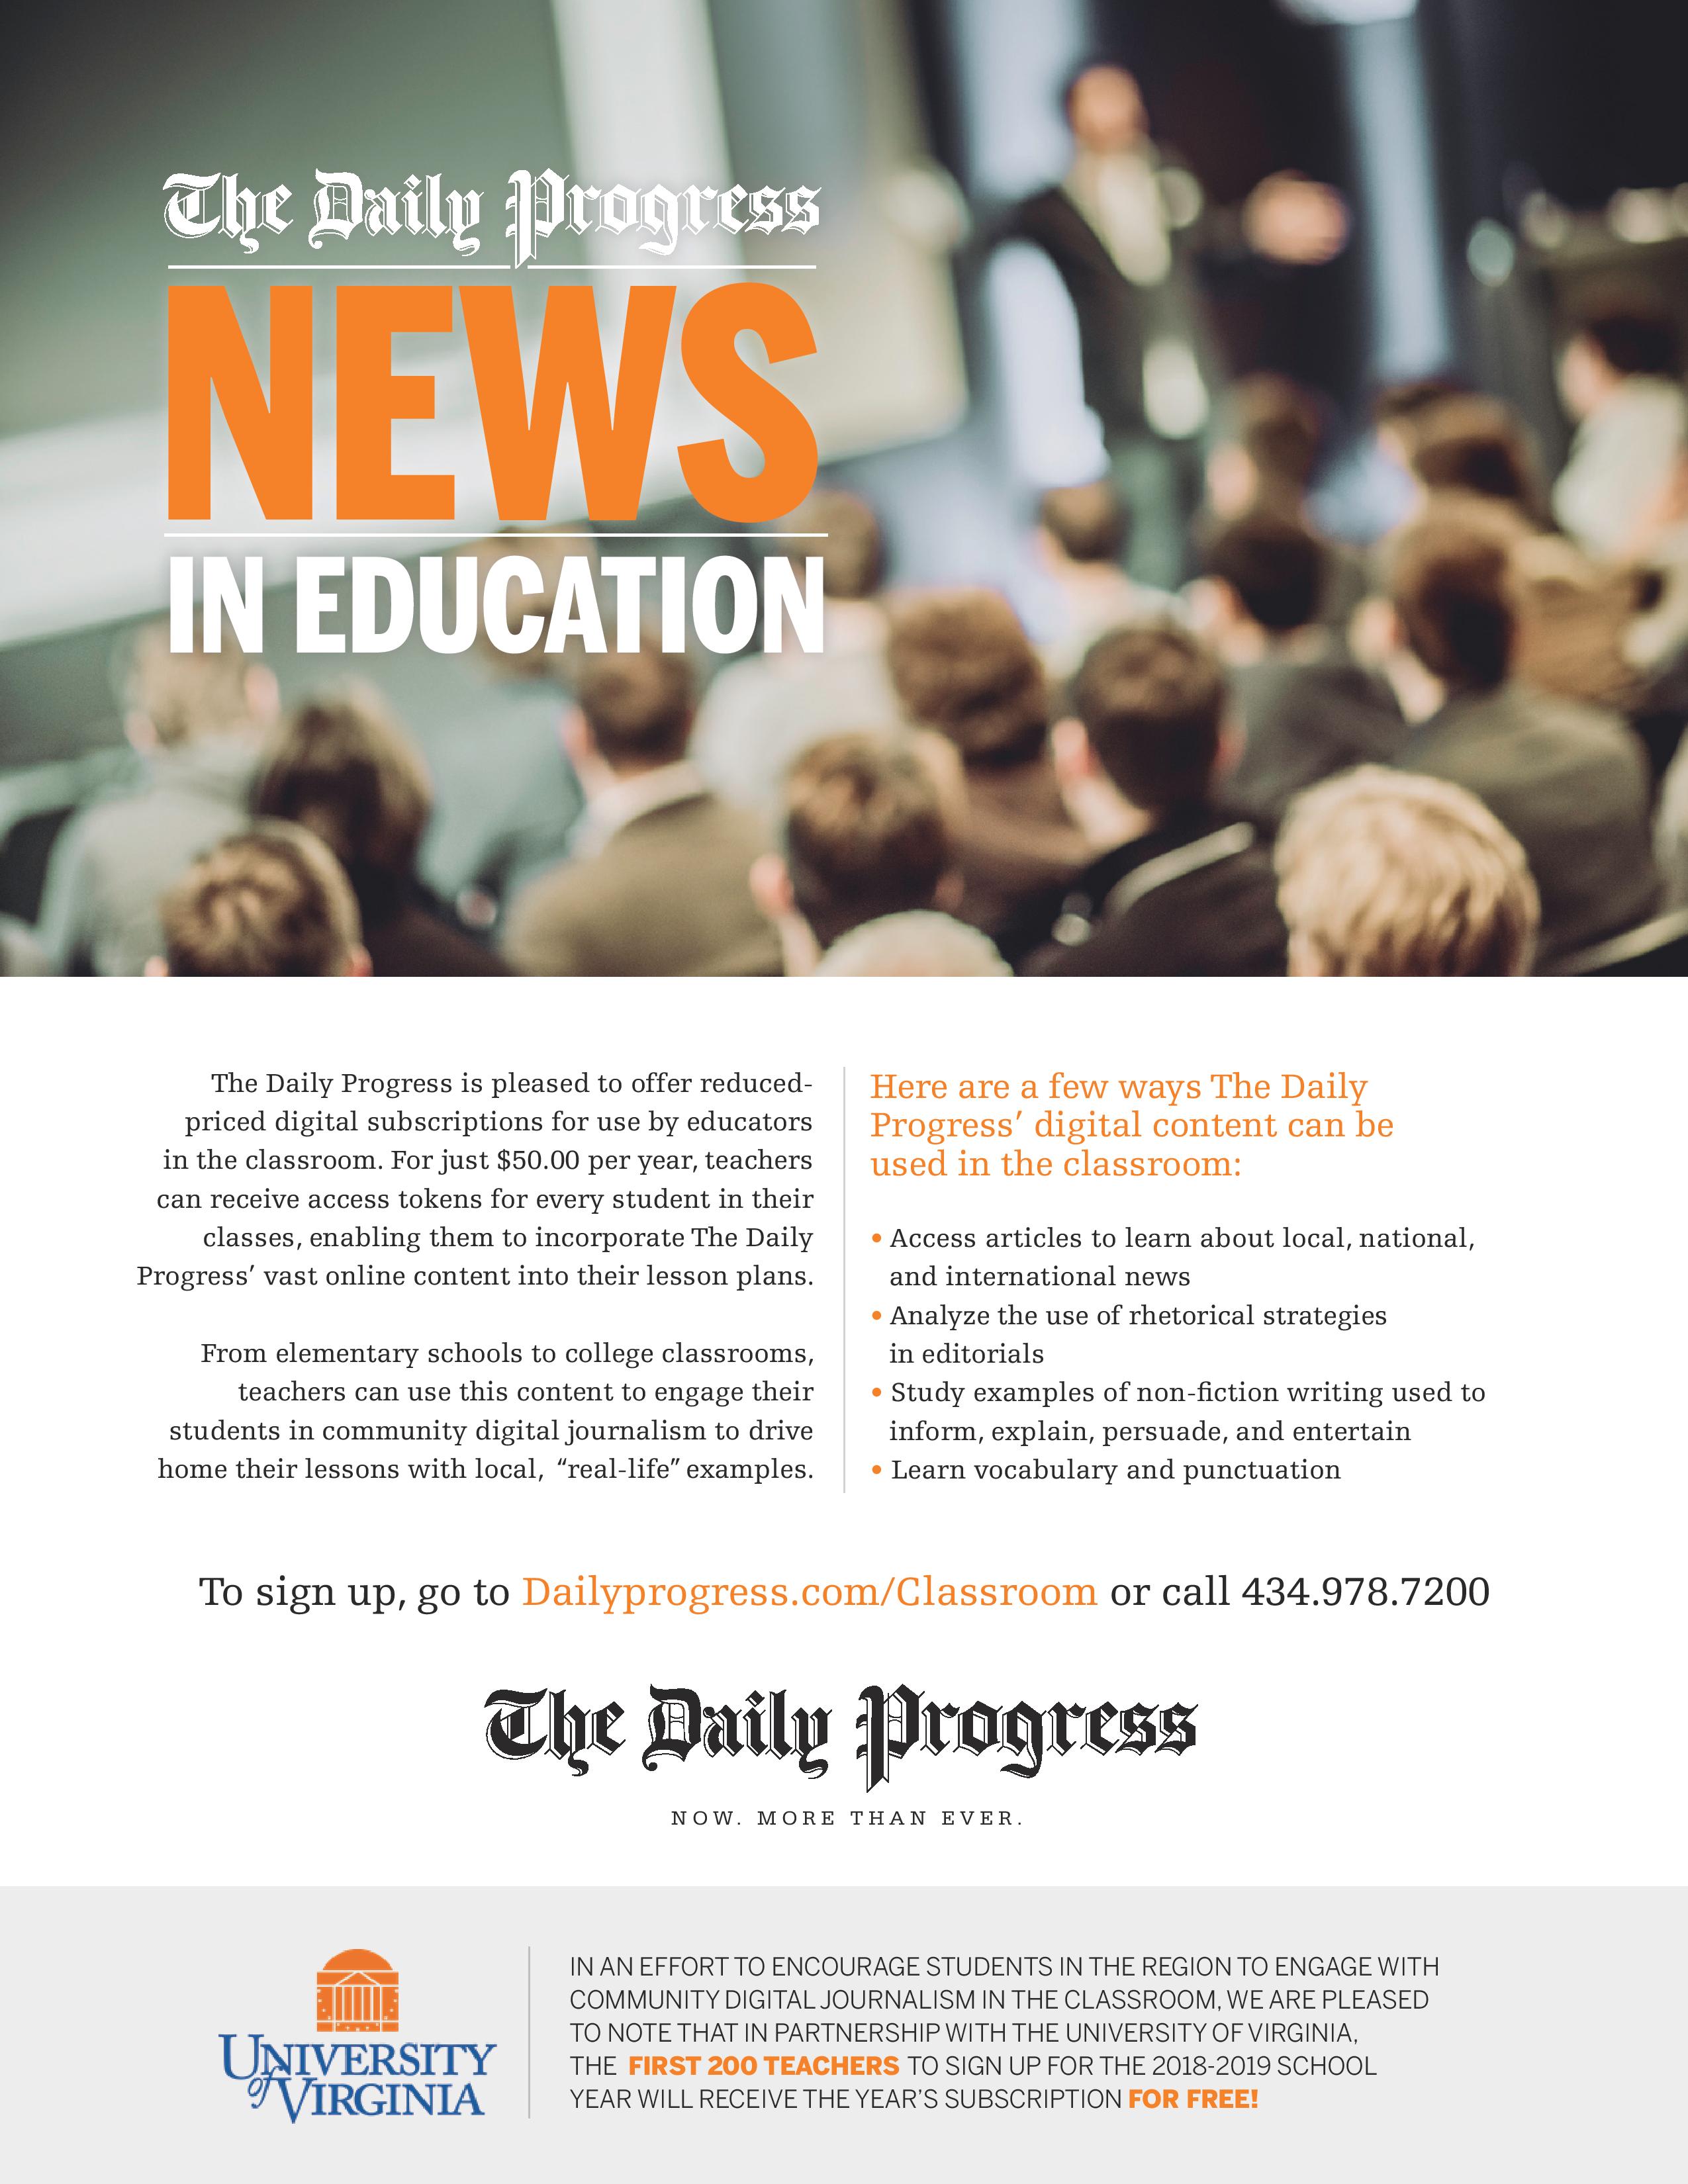 news articles on education